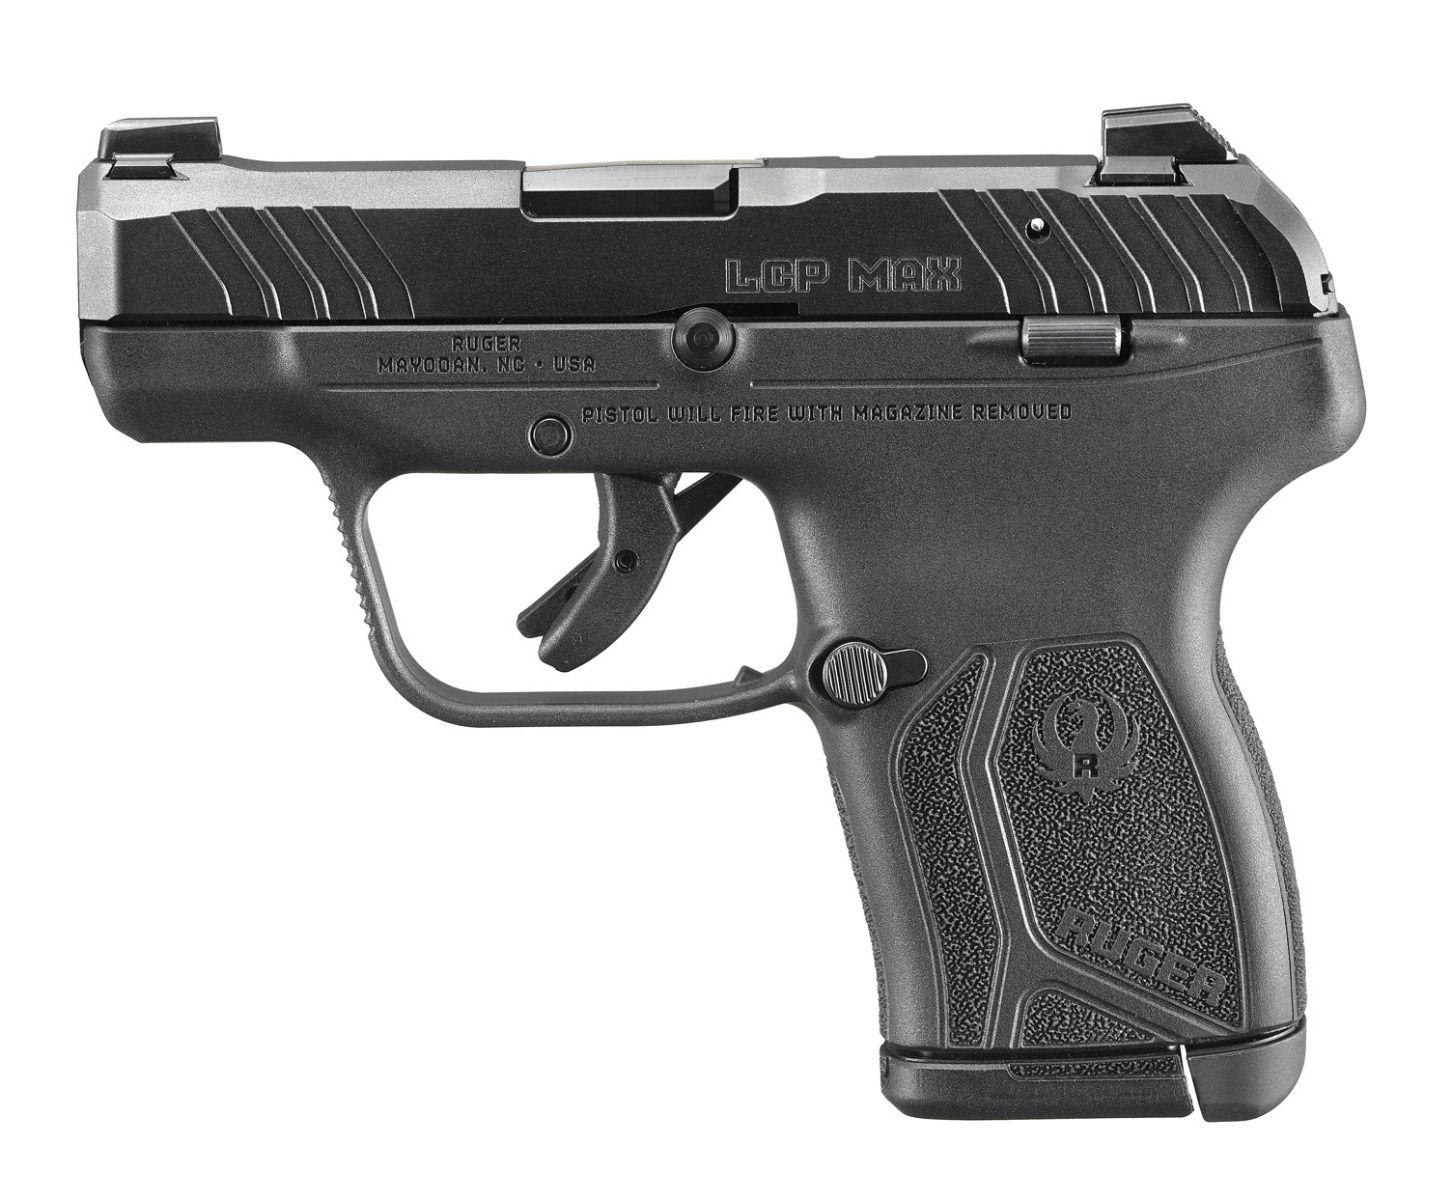 Ruger LCP Max w/Tritium Front Sight 380ACP 2.8" Barrel 10+1 - $329 (Free S/H on Firearms)